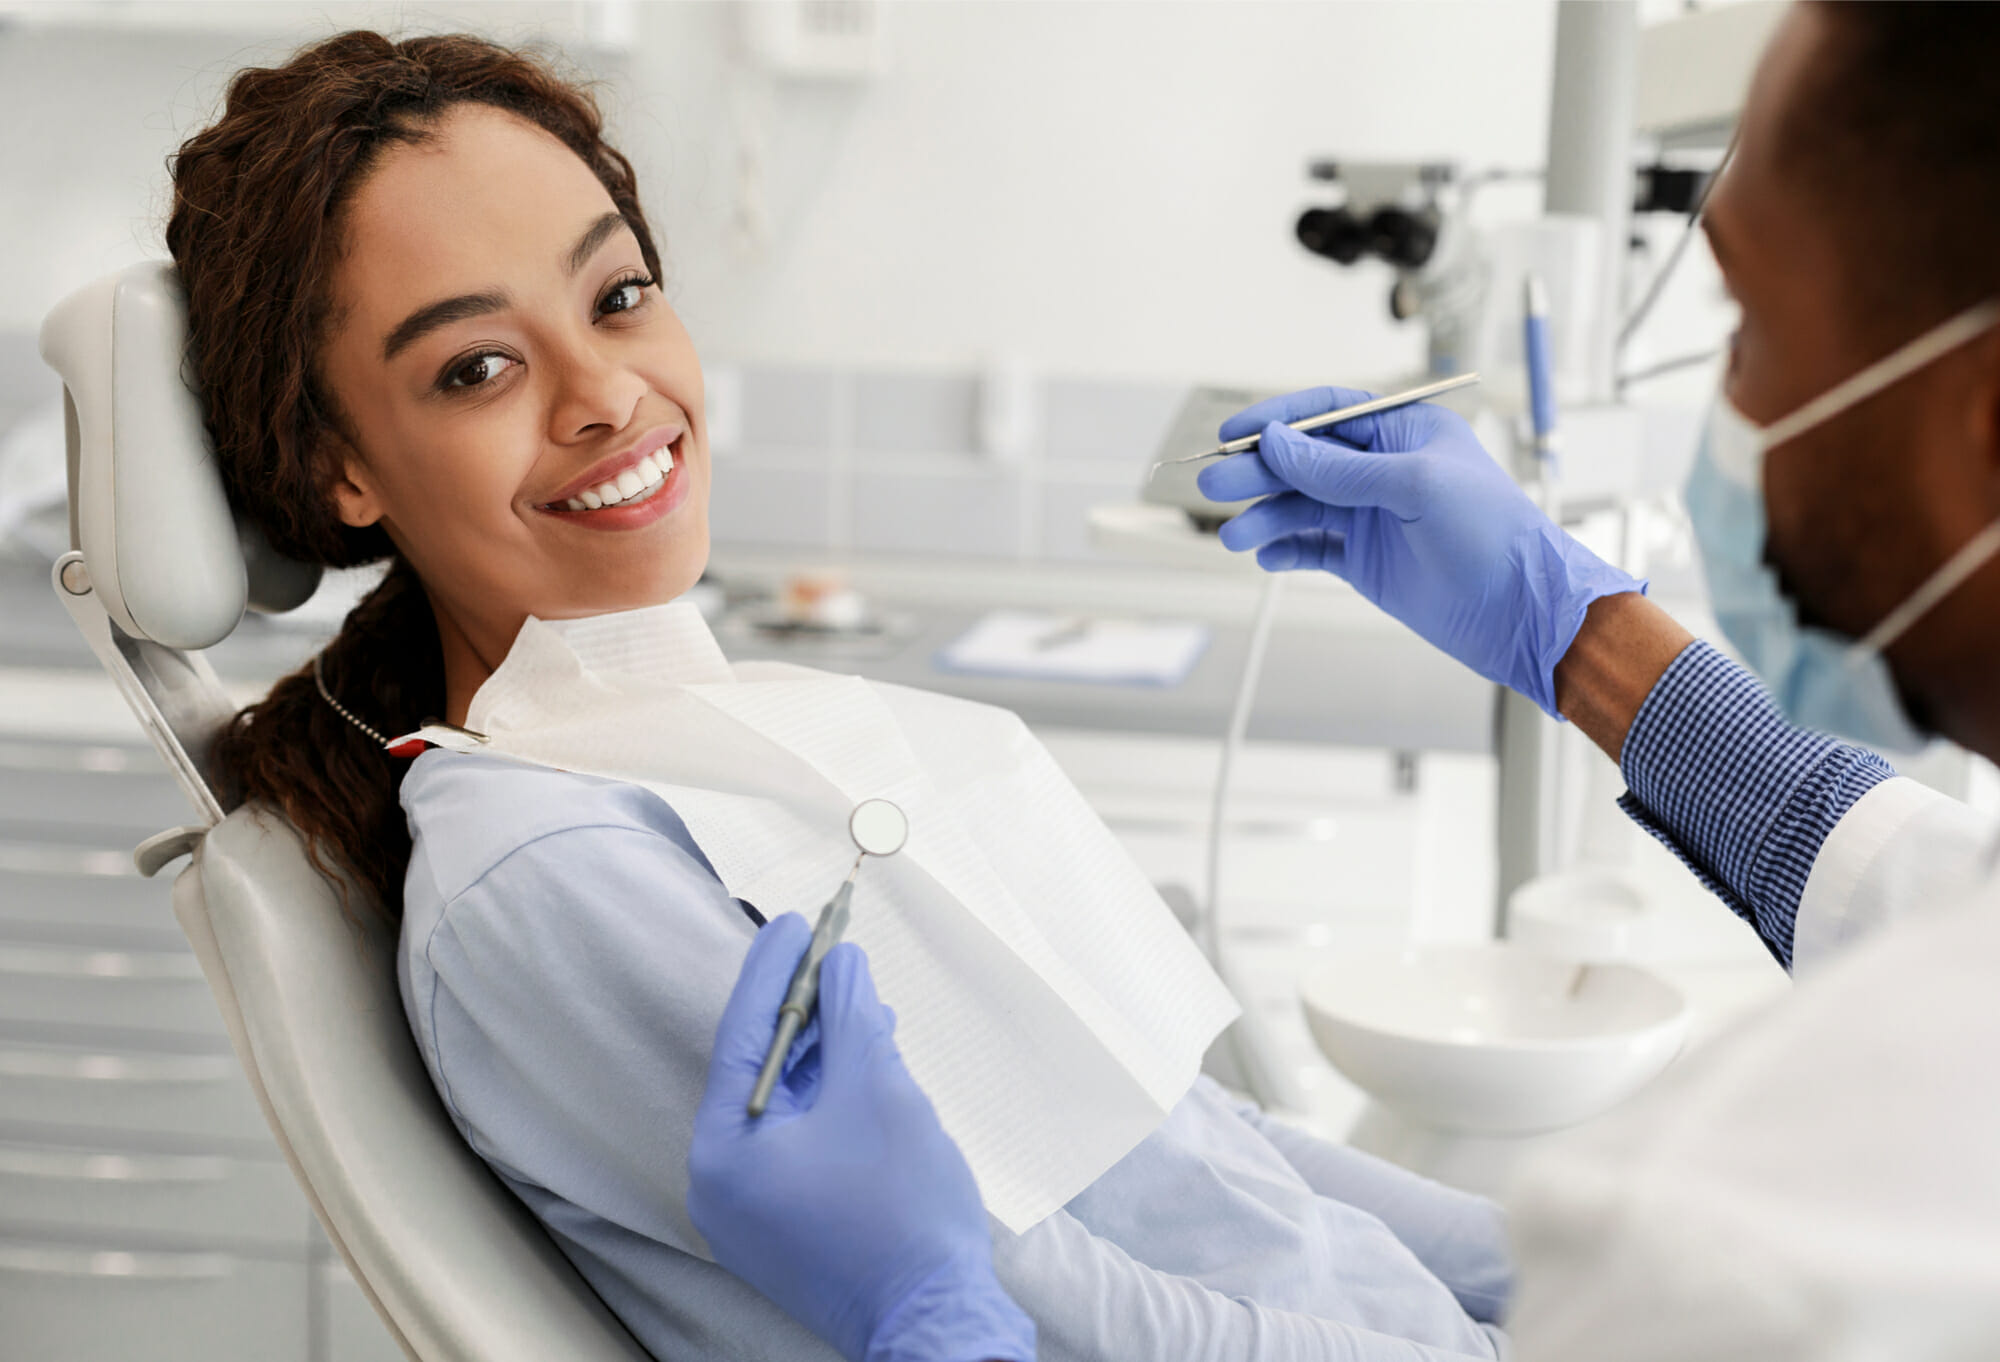 woman in dental appointment